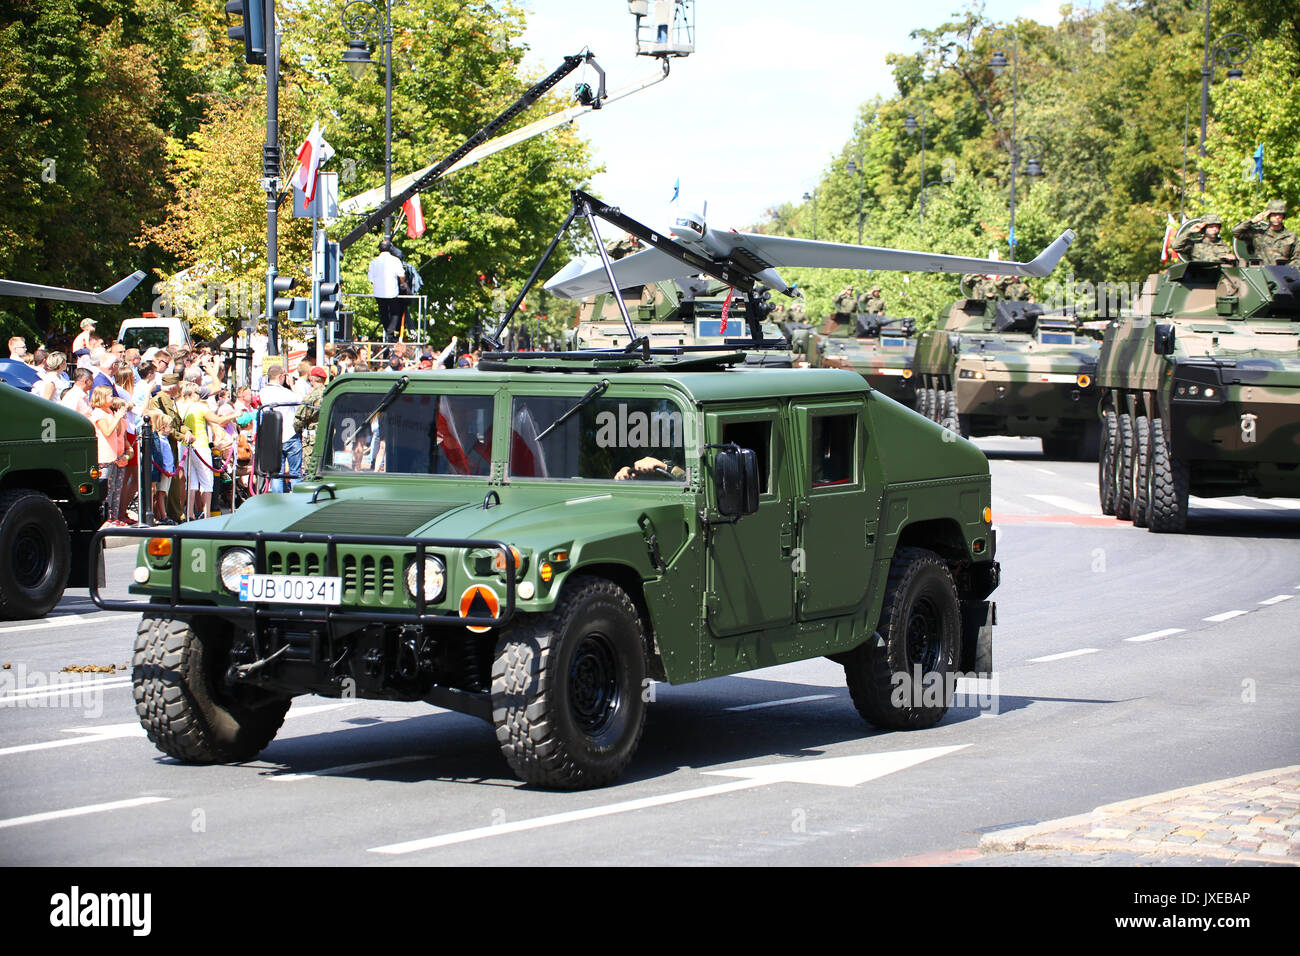 Warsaw, Poland, 15th August 2017: Polish Army holds celebration day with a  military parade of armed and air forces on the 97th anniversary of the  battle of Warsaw in 1920. Troops, vehicles